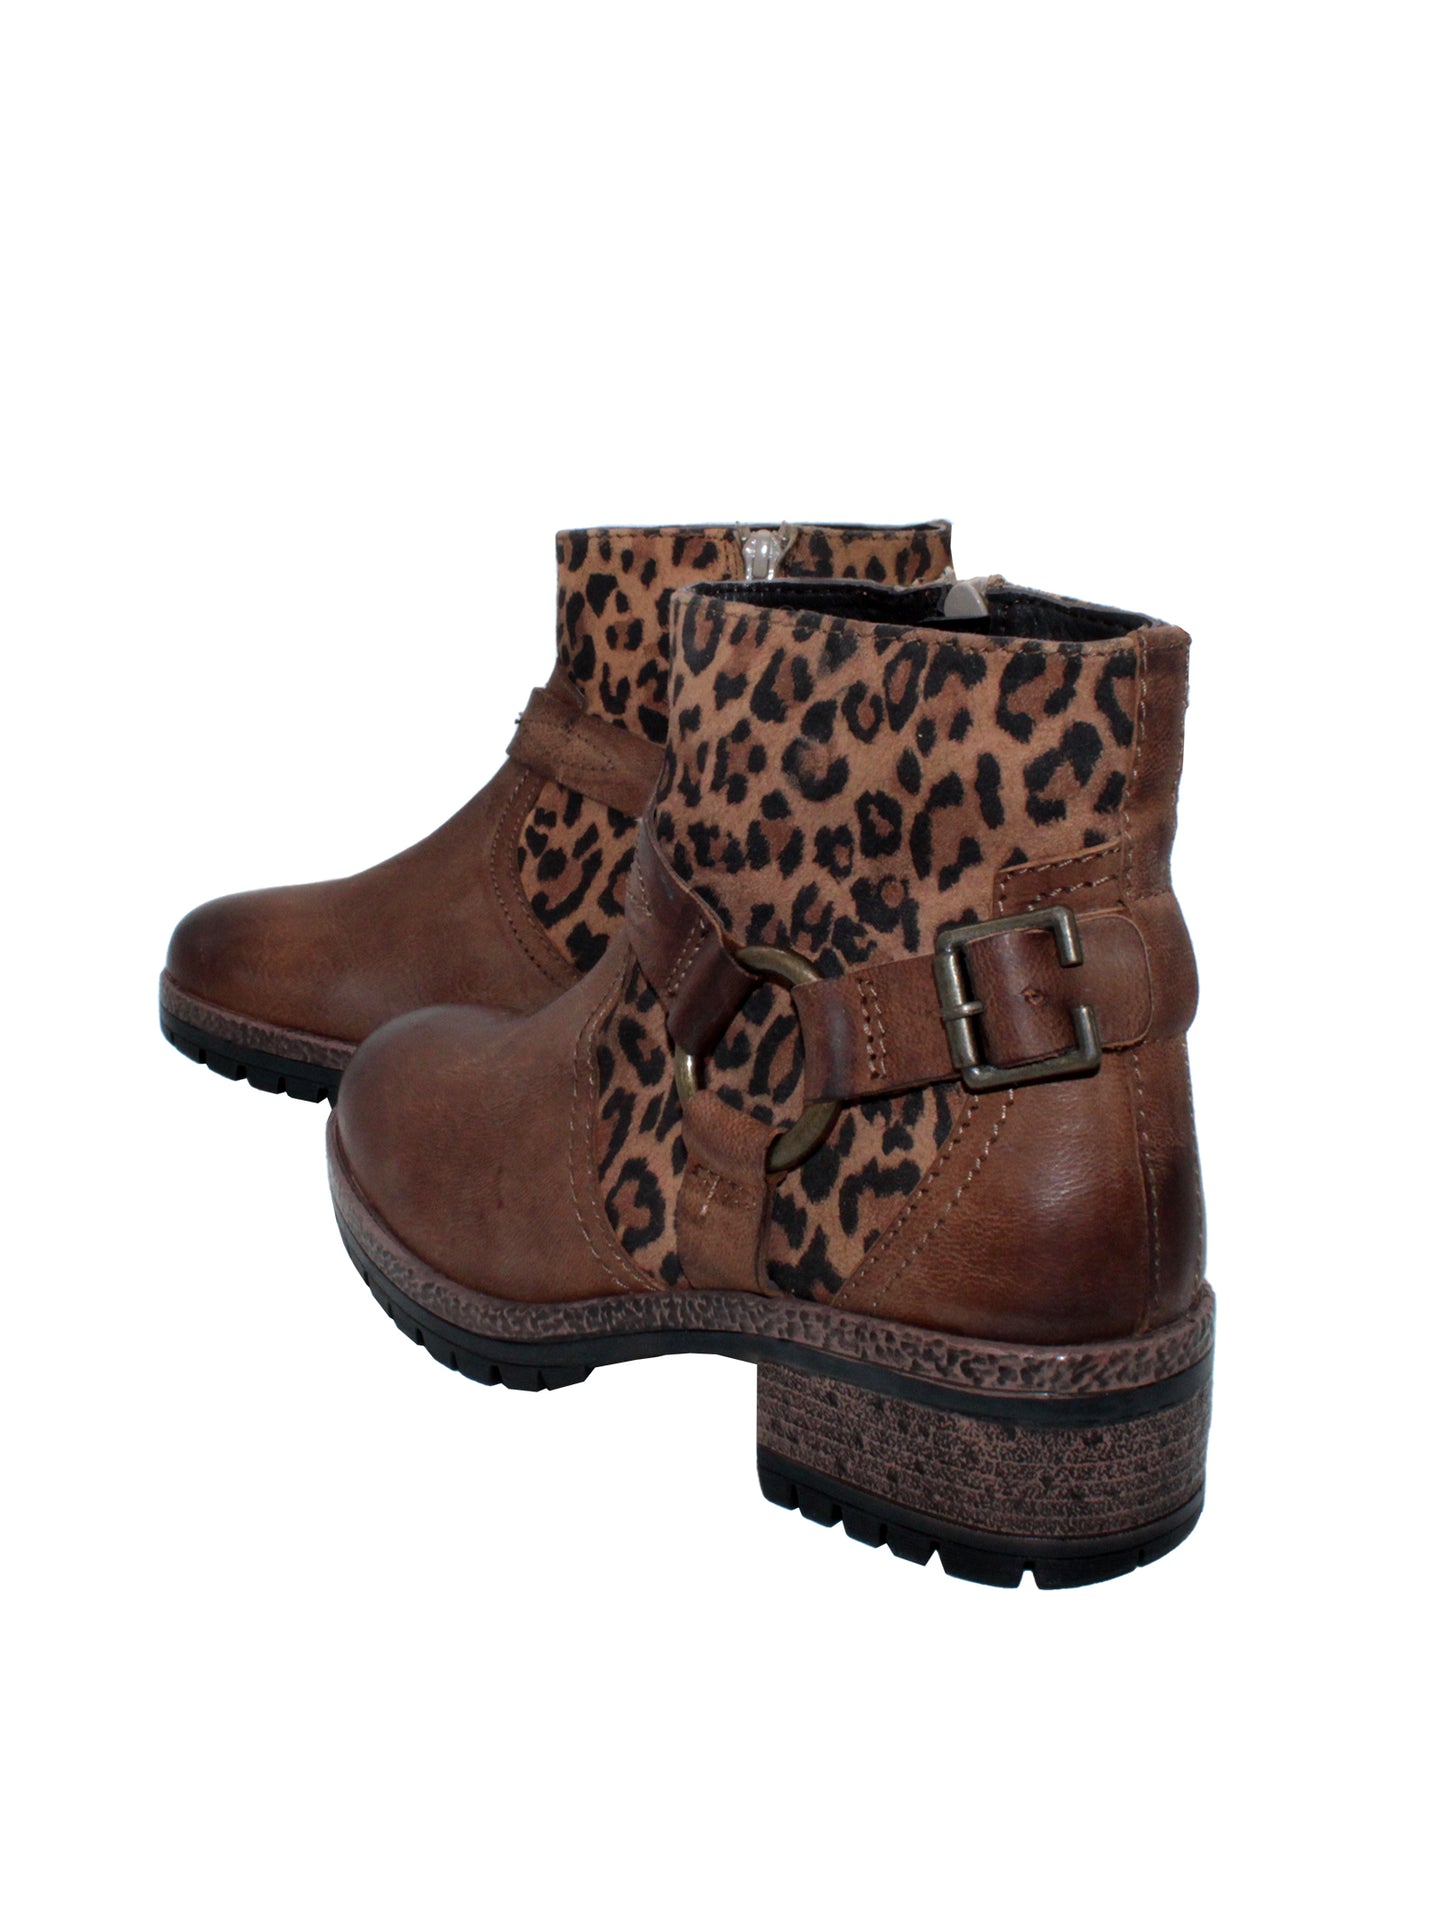 Leather and microfiber leopard printed upper Harness detail with metal buckle and O rings Internal nylon zipper Easy on and off moto bootie style Padded insole Approx. 4.75” shaft height Approx. 1.75" heel height Rubber lug bottom outsole back